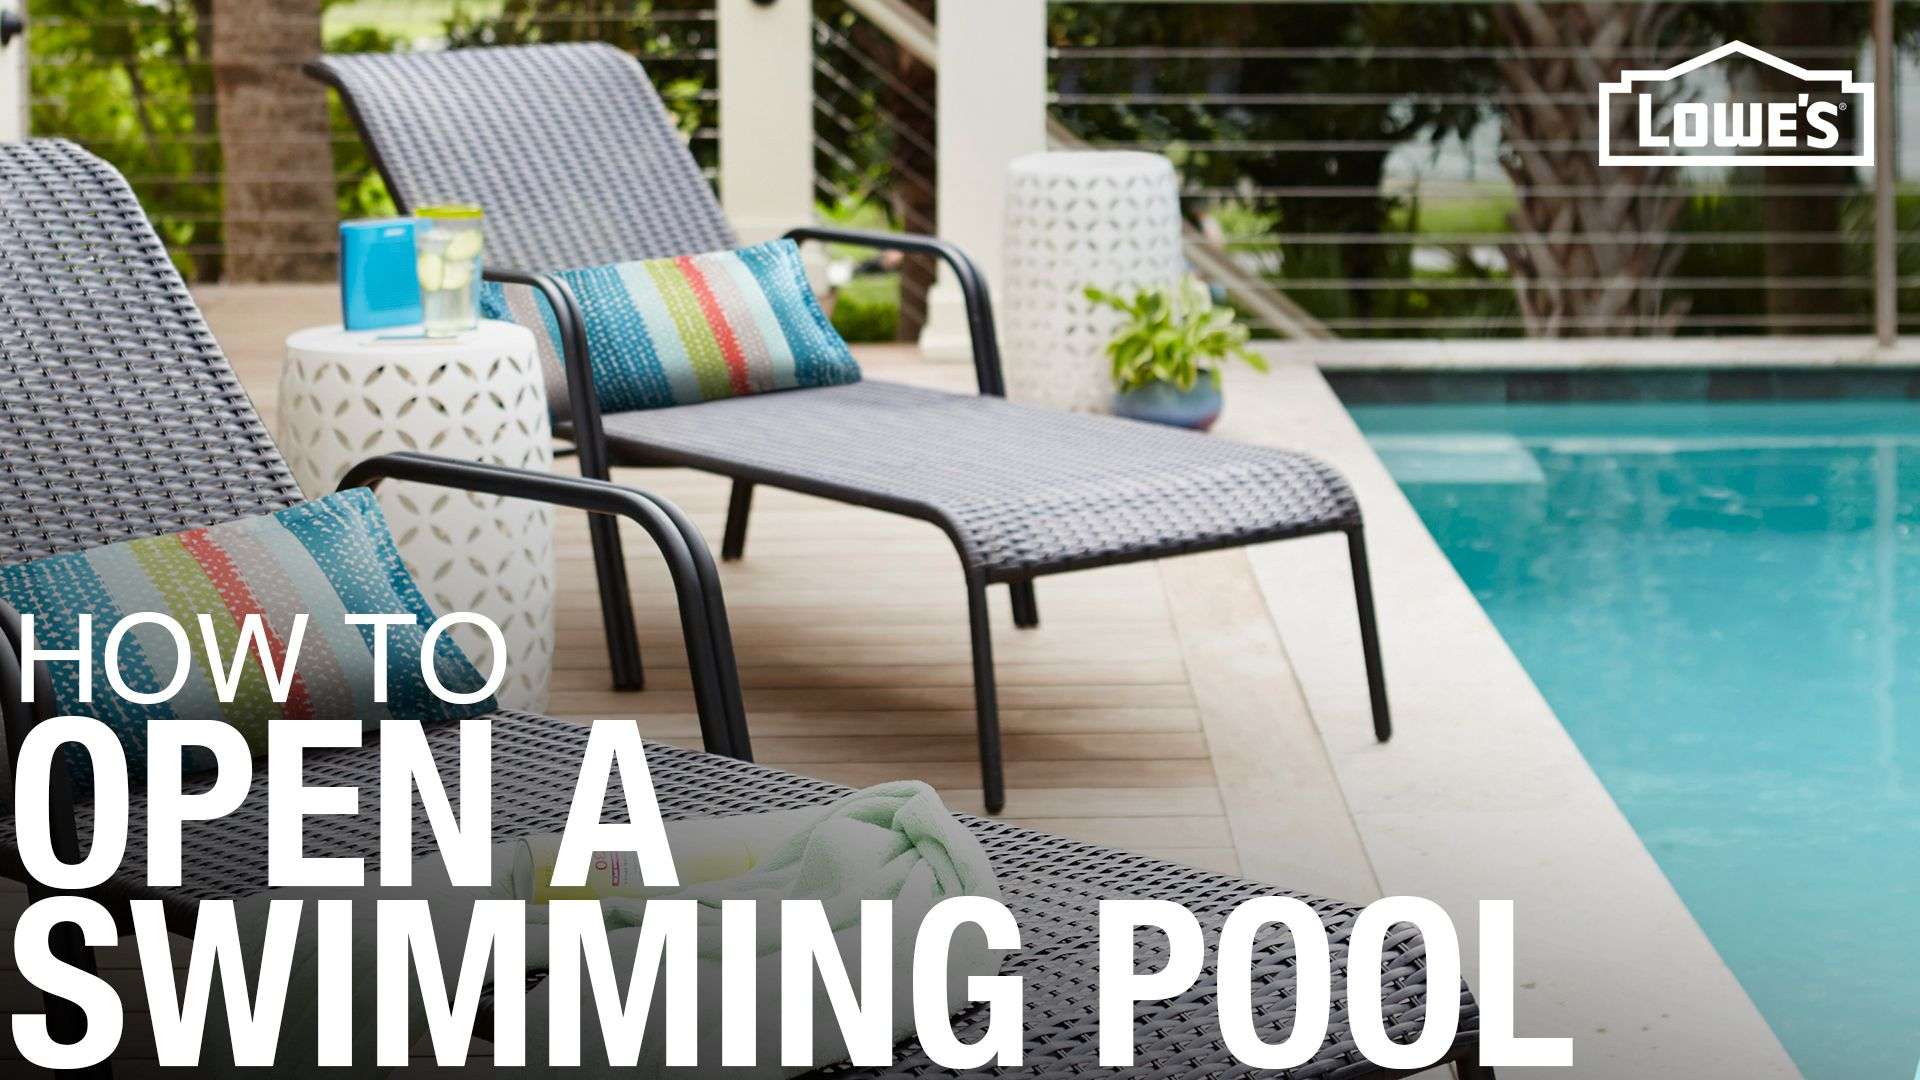 How to Open a Swimming Pool